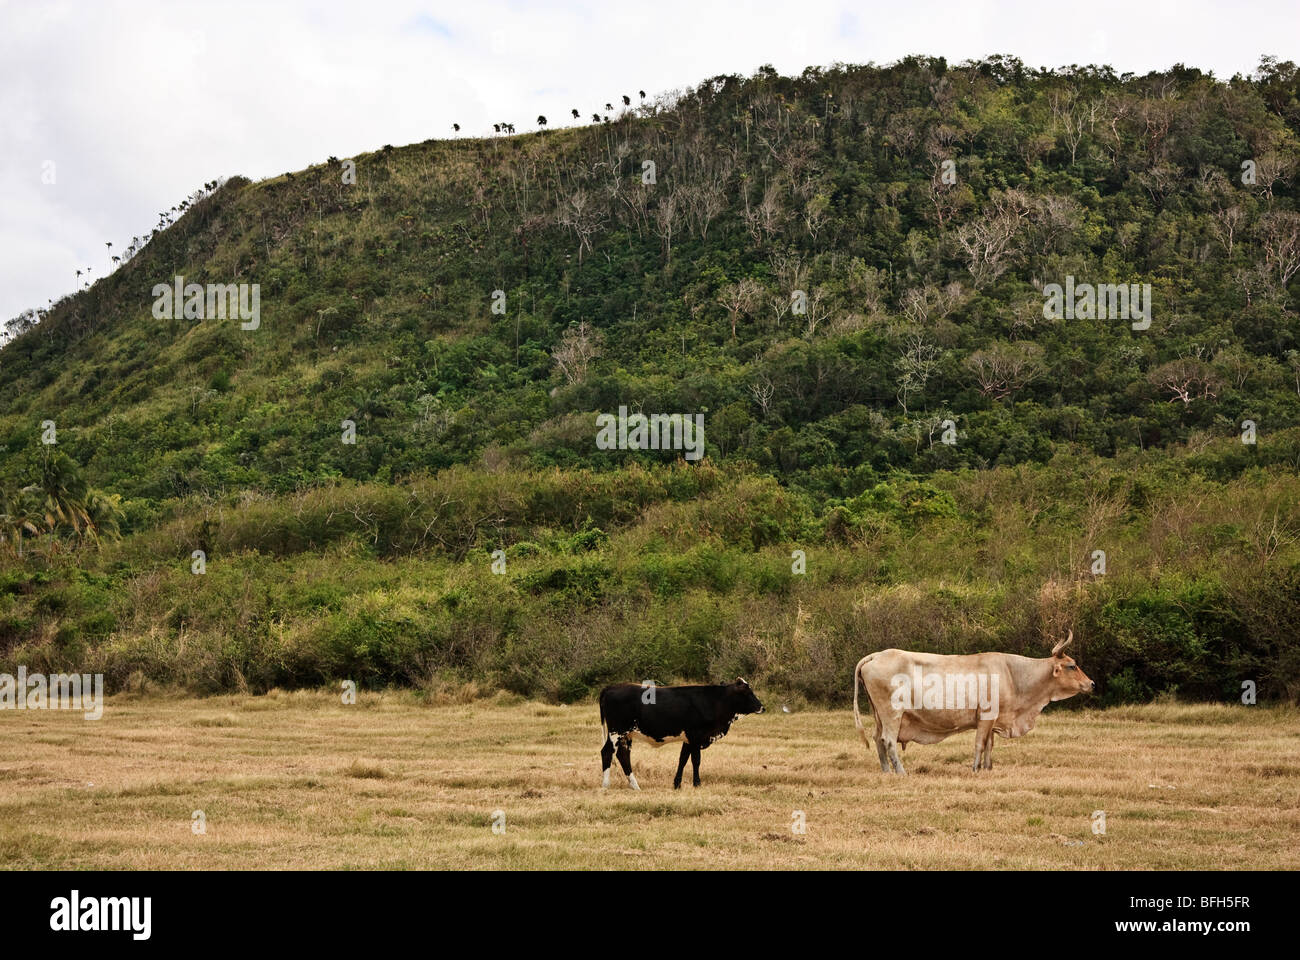 Cow and calf grazing in the open field, La Habana province, Cuba. Winter time, dry grass. Stock Photo